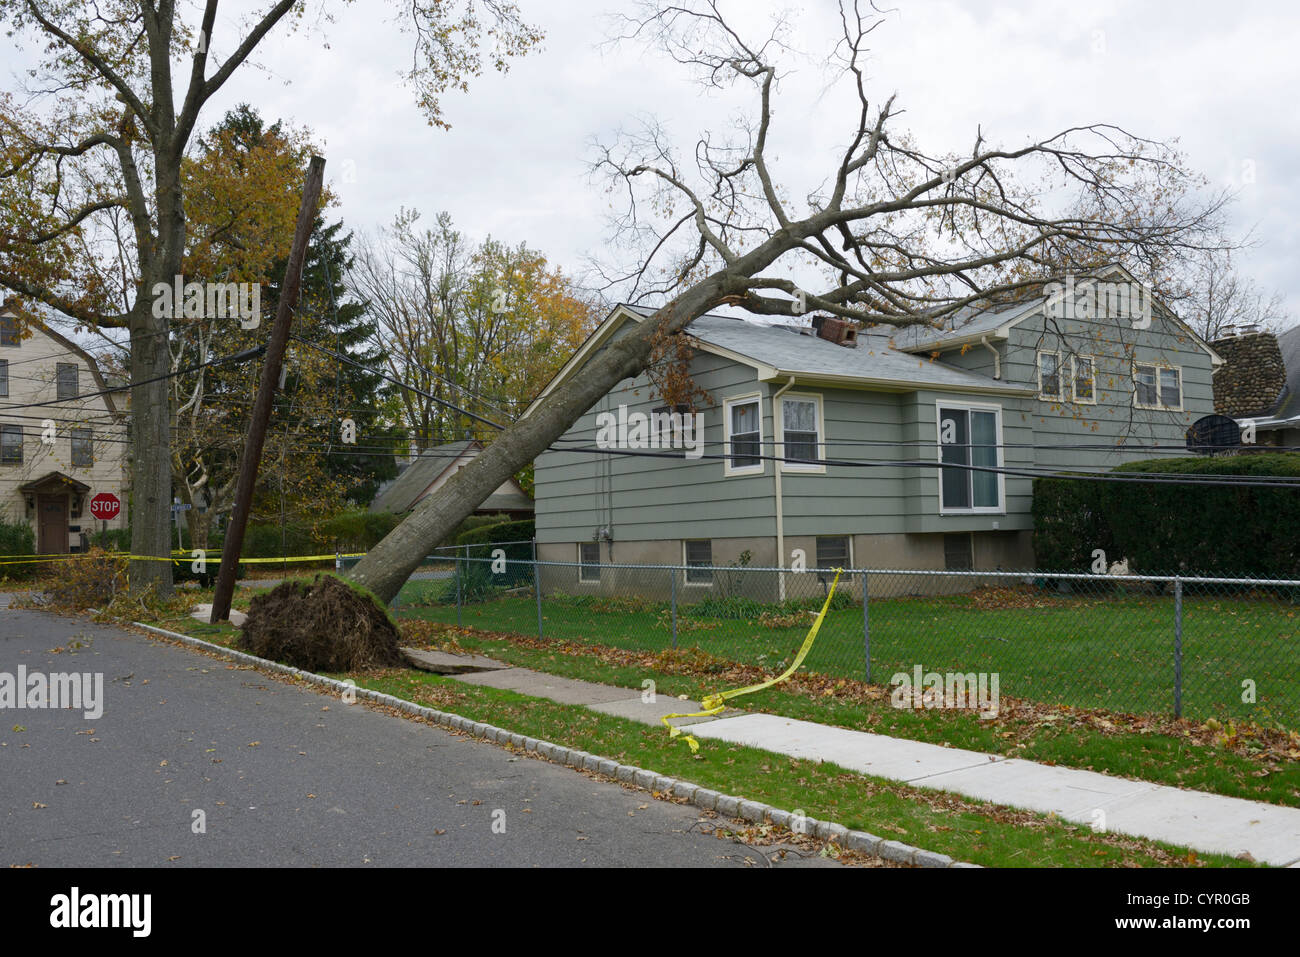 Destruction to houses, trees and power lines caused by Hurricane Sandy, northern New Jersey Stock Photo